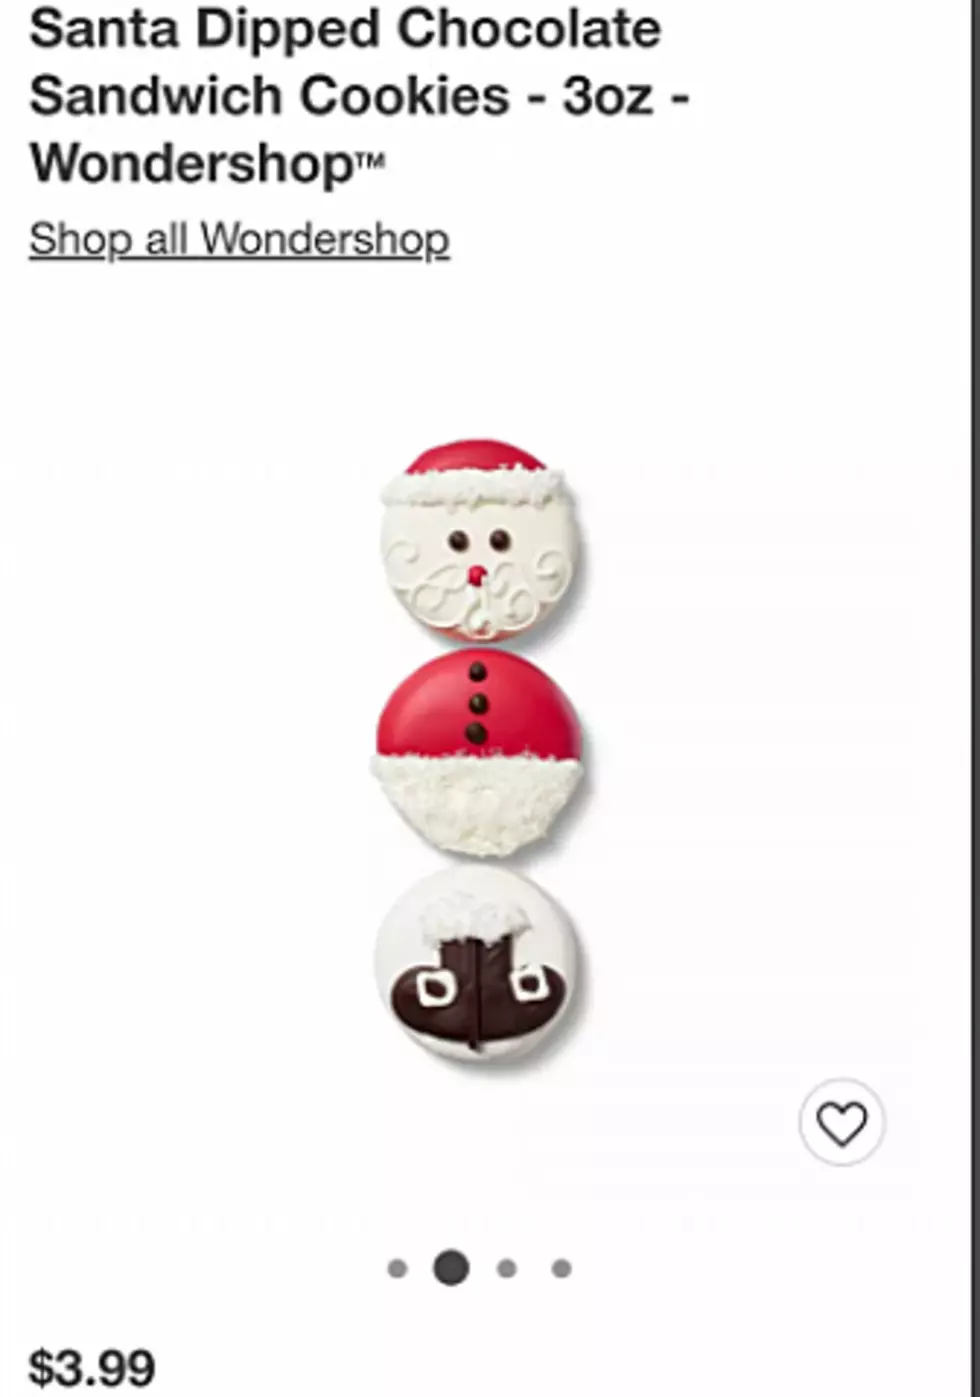 Target Selling Cookies– Supposed to be Boots